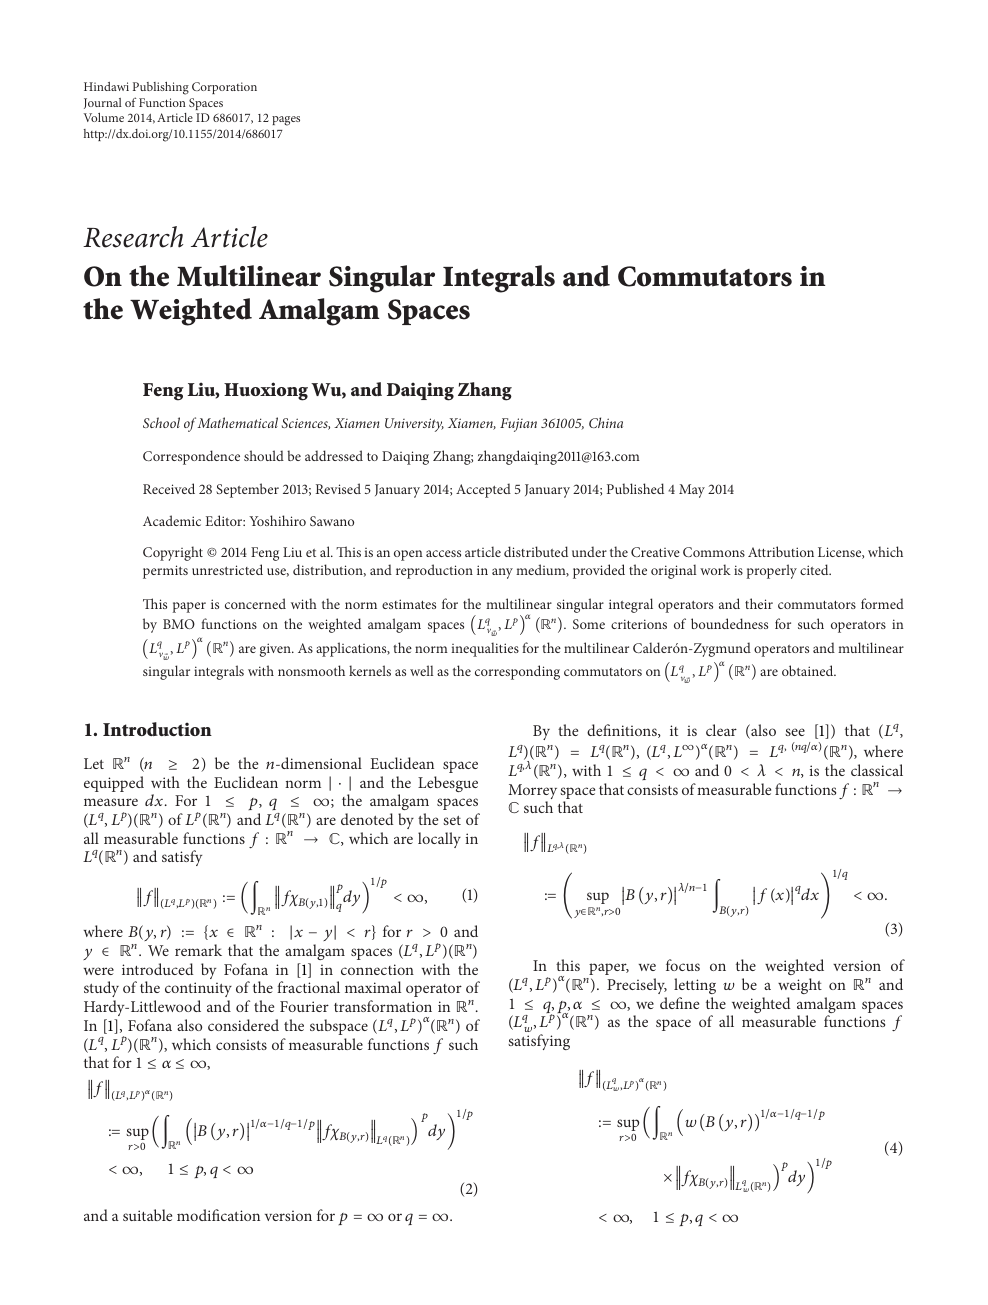 On The Multilinear Singular Integrals And Commutators In The Weighted Amalgam Spaces Topic Of Research Paper In Mathematics Download Scholarly Article Pdf And Read For Free On Cyberleninka Open Science Hub